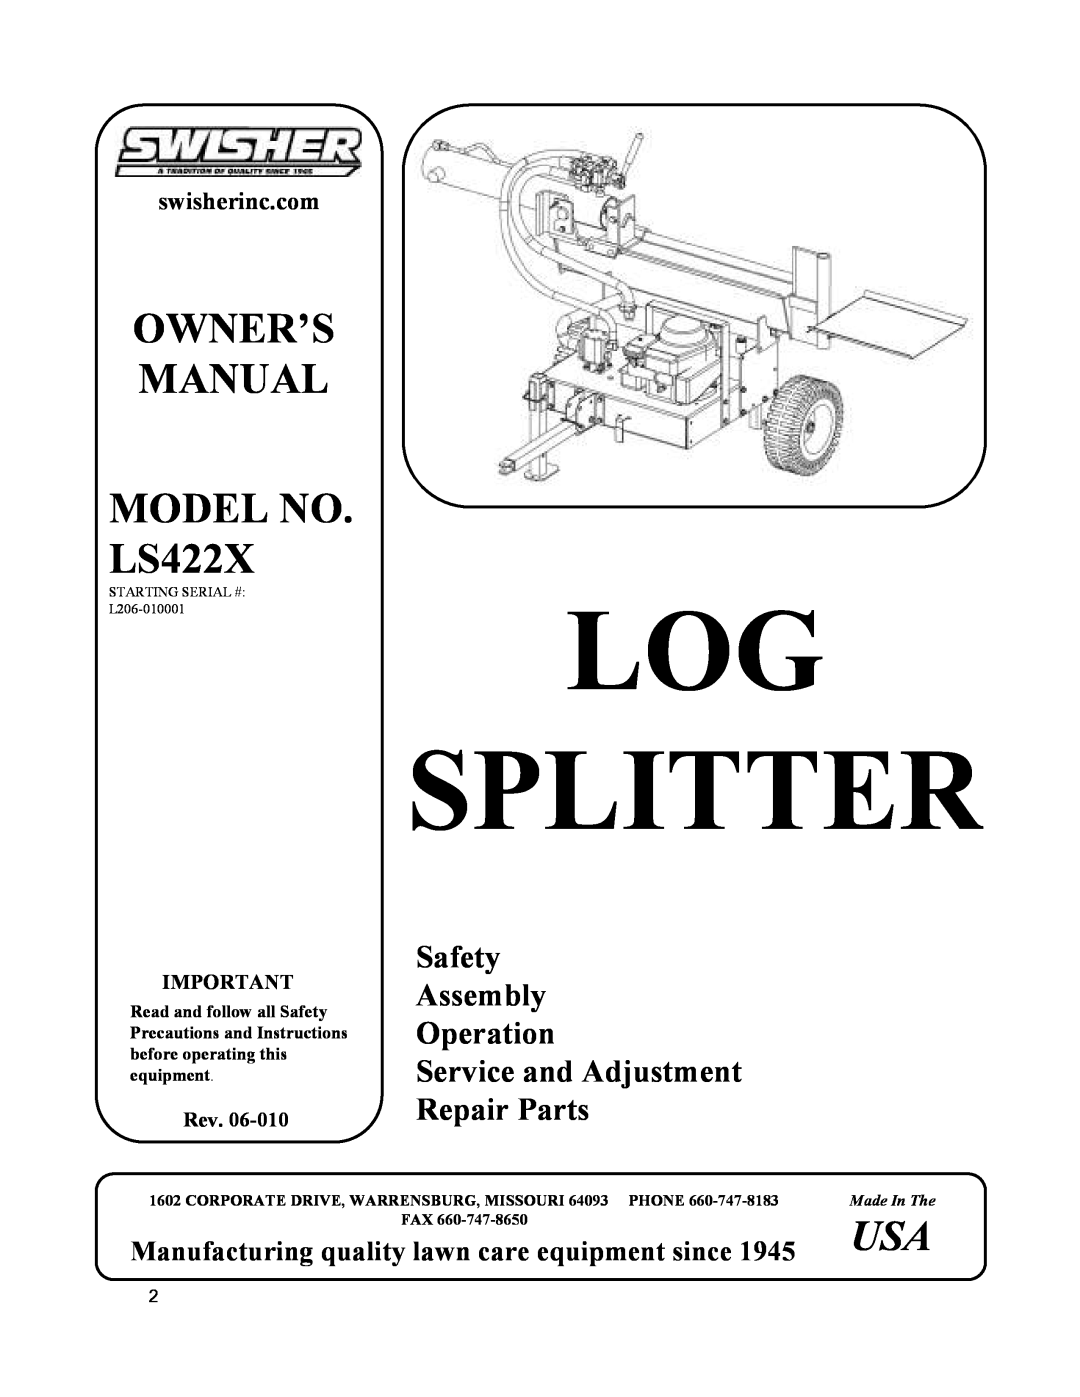 Swisher owner manual OWNER’S MANUAL MODEL NO. LS422X, Manufacturing quality lawn care equipment since, Log Splitter 